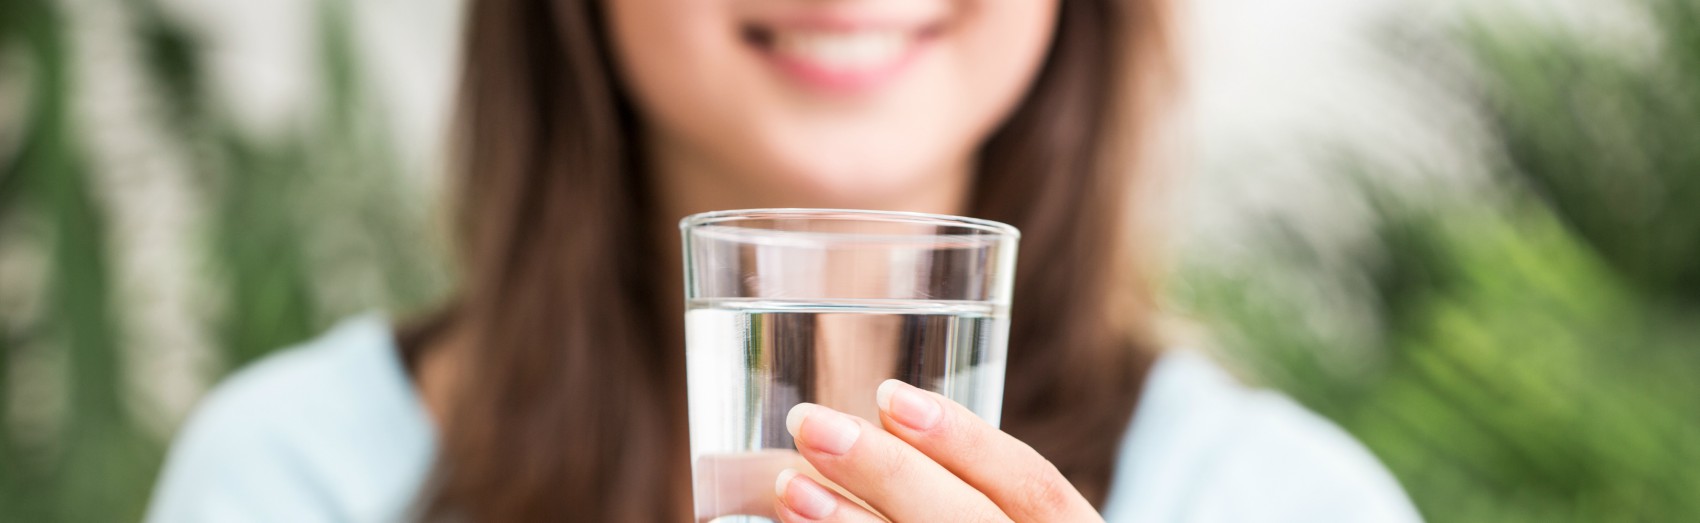 I’m So Sloshed Right Now: Three Simple Ways to Drink More Water